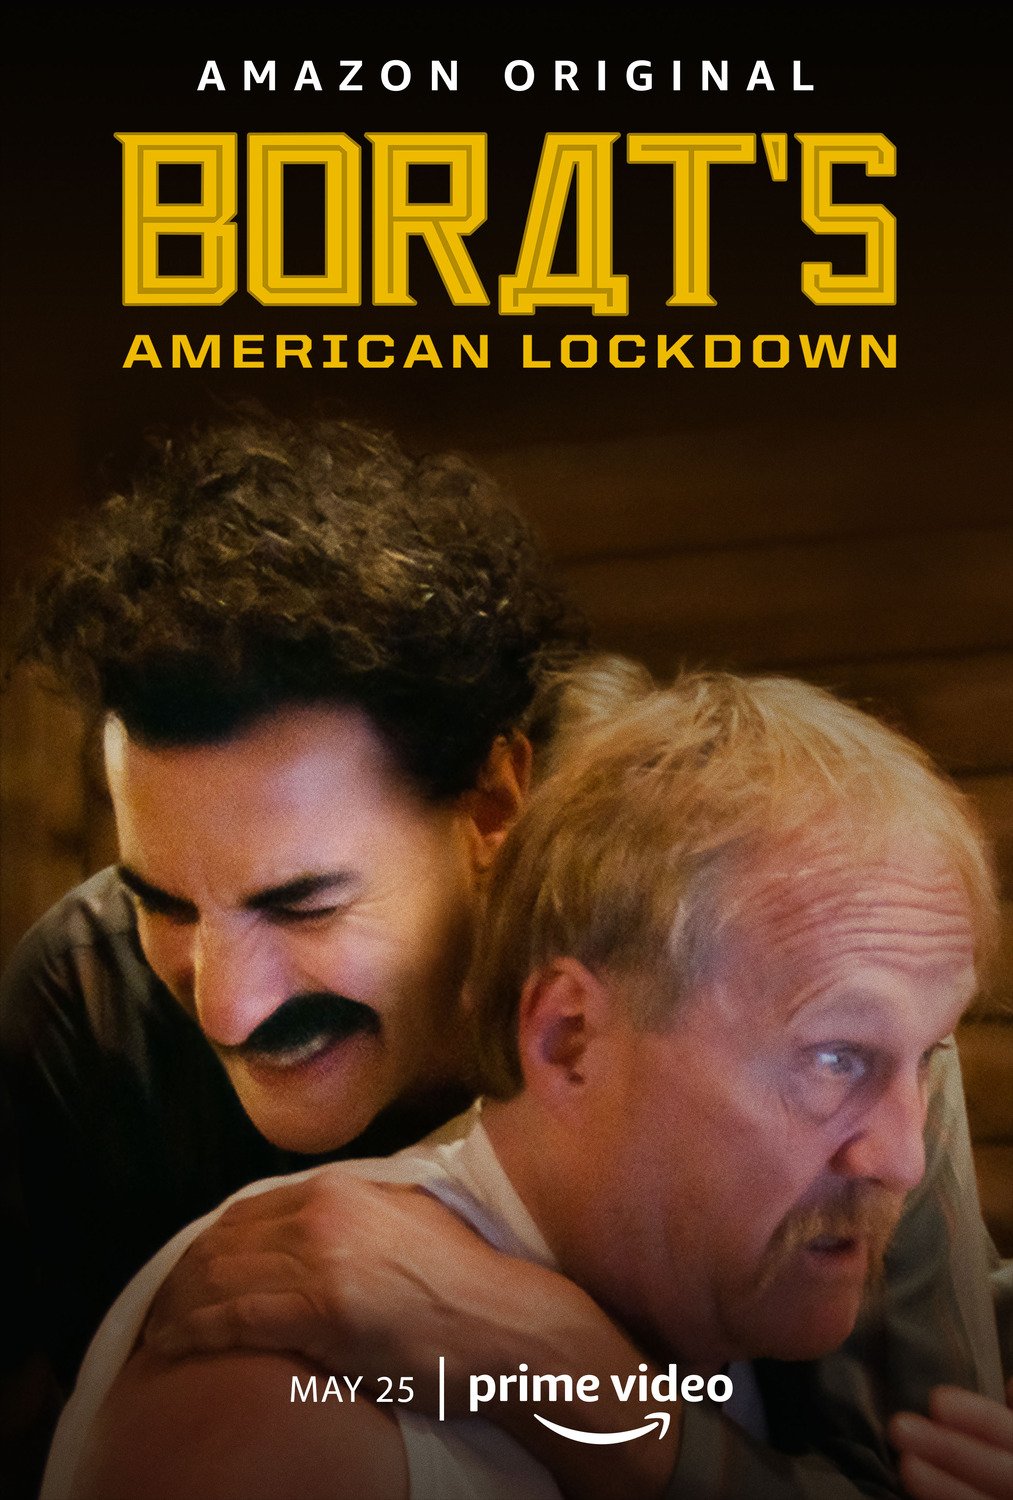 Borat Supplemental Reportings Retrieved From Floor of Stable Containing Editing Machine : Affiche